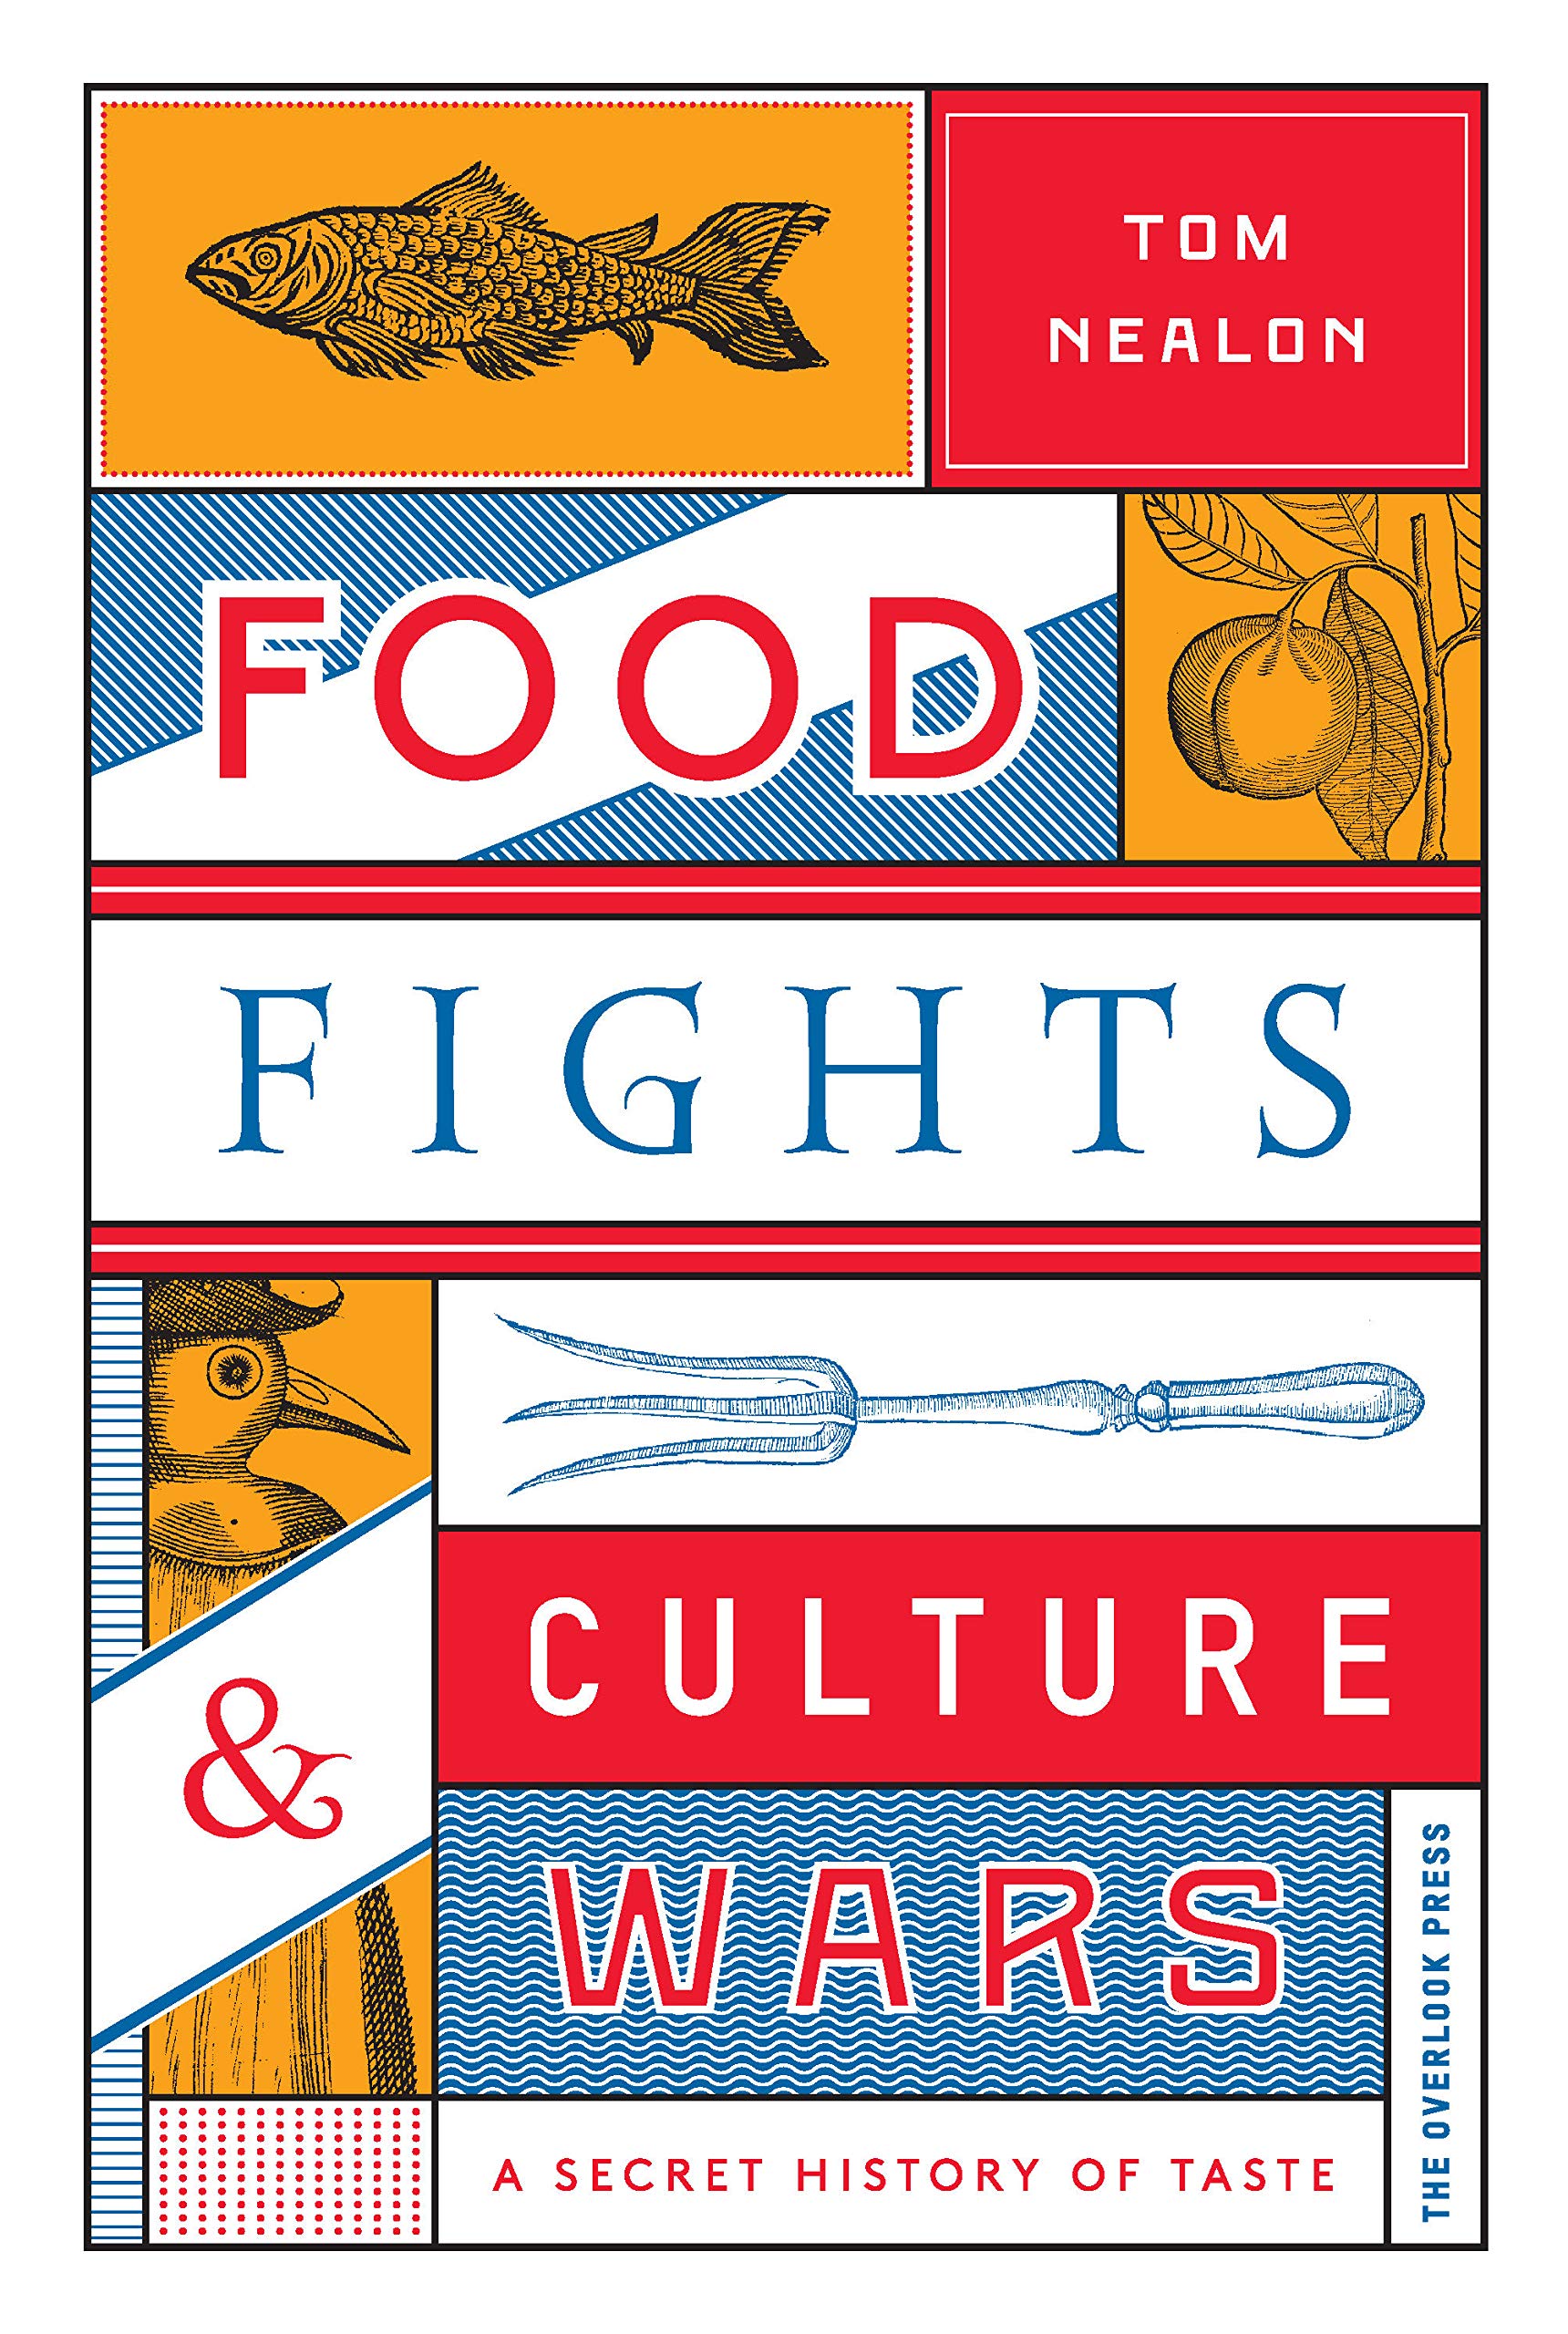 Food Fights and Culture Wars